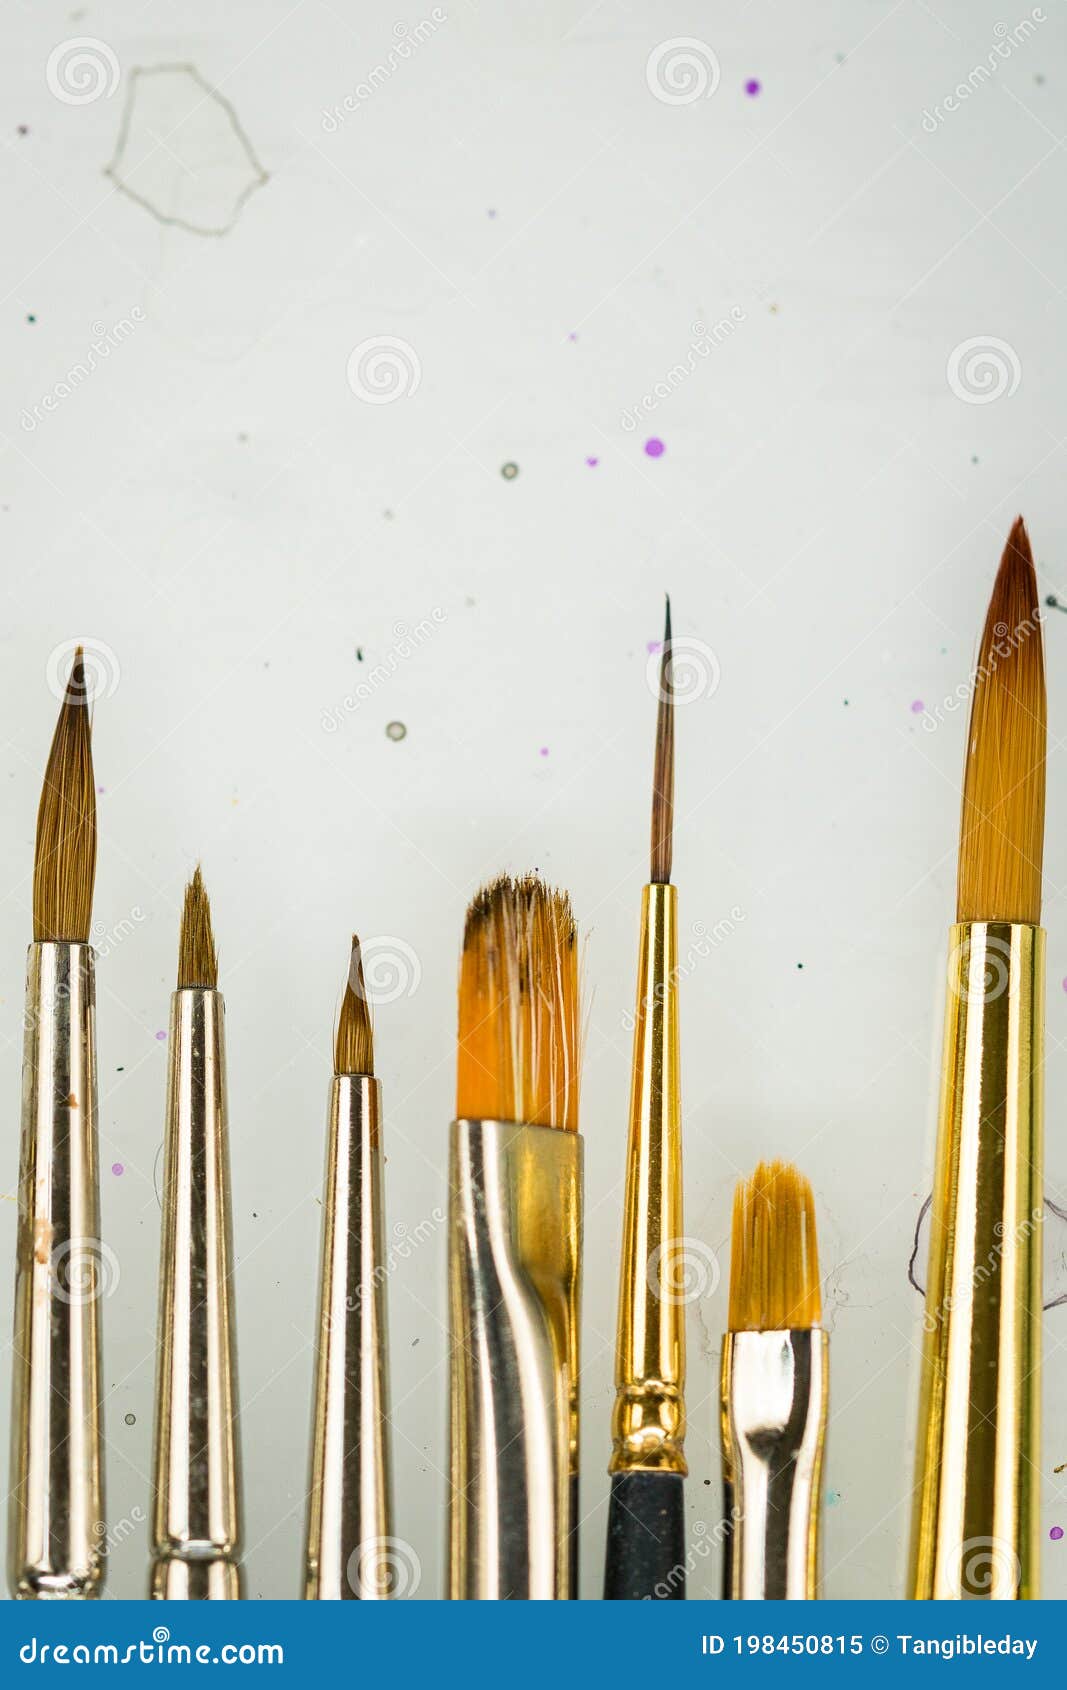 Painting brush types  Painting art projects, Art painting